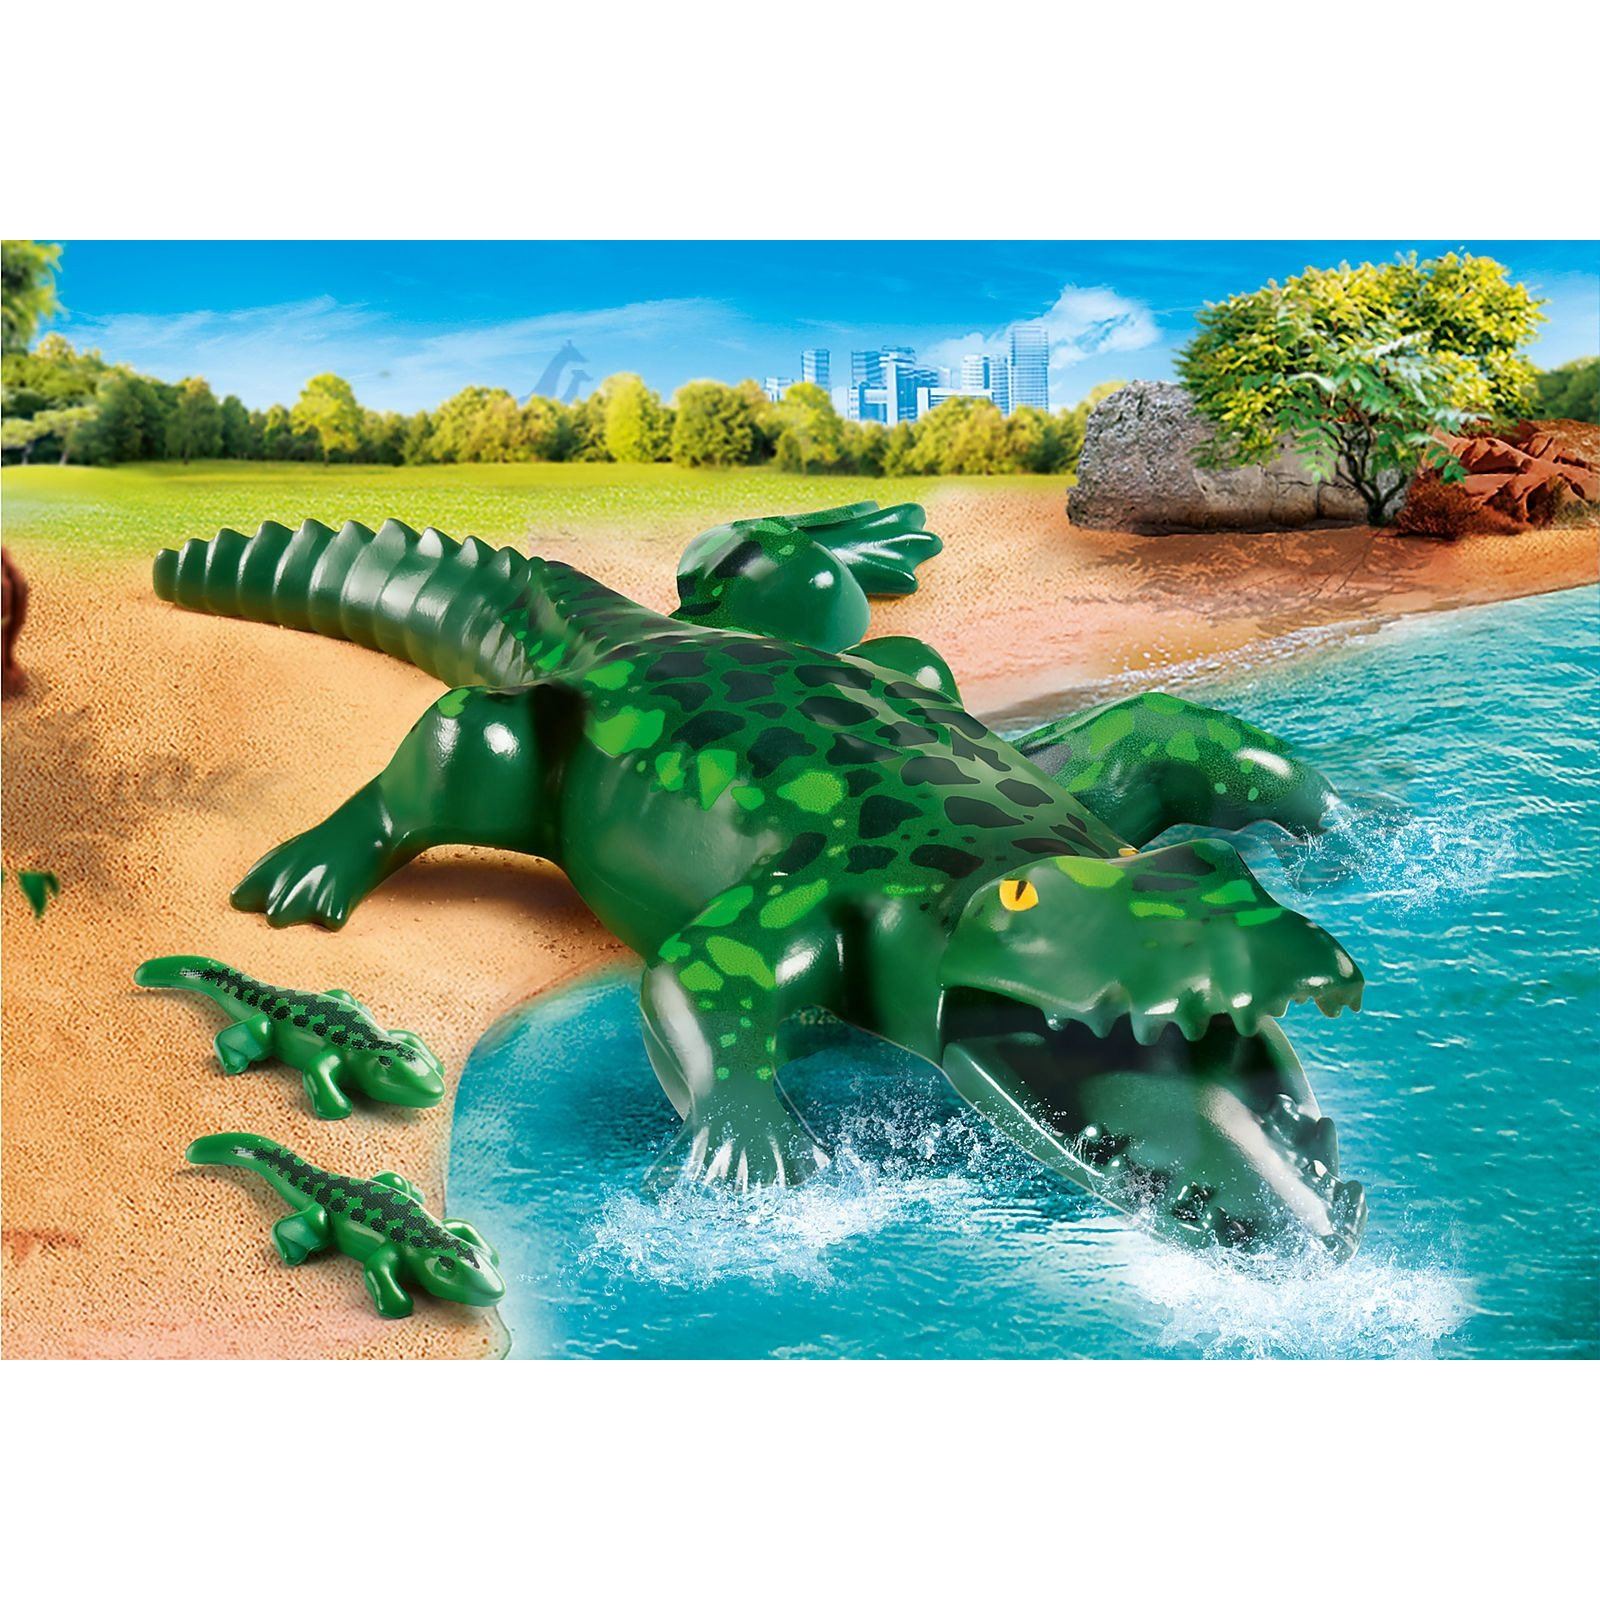 Playmobil Alligator with Babies